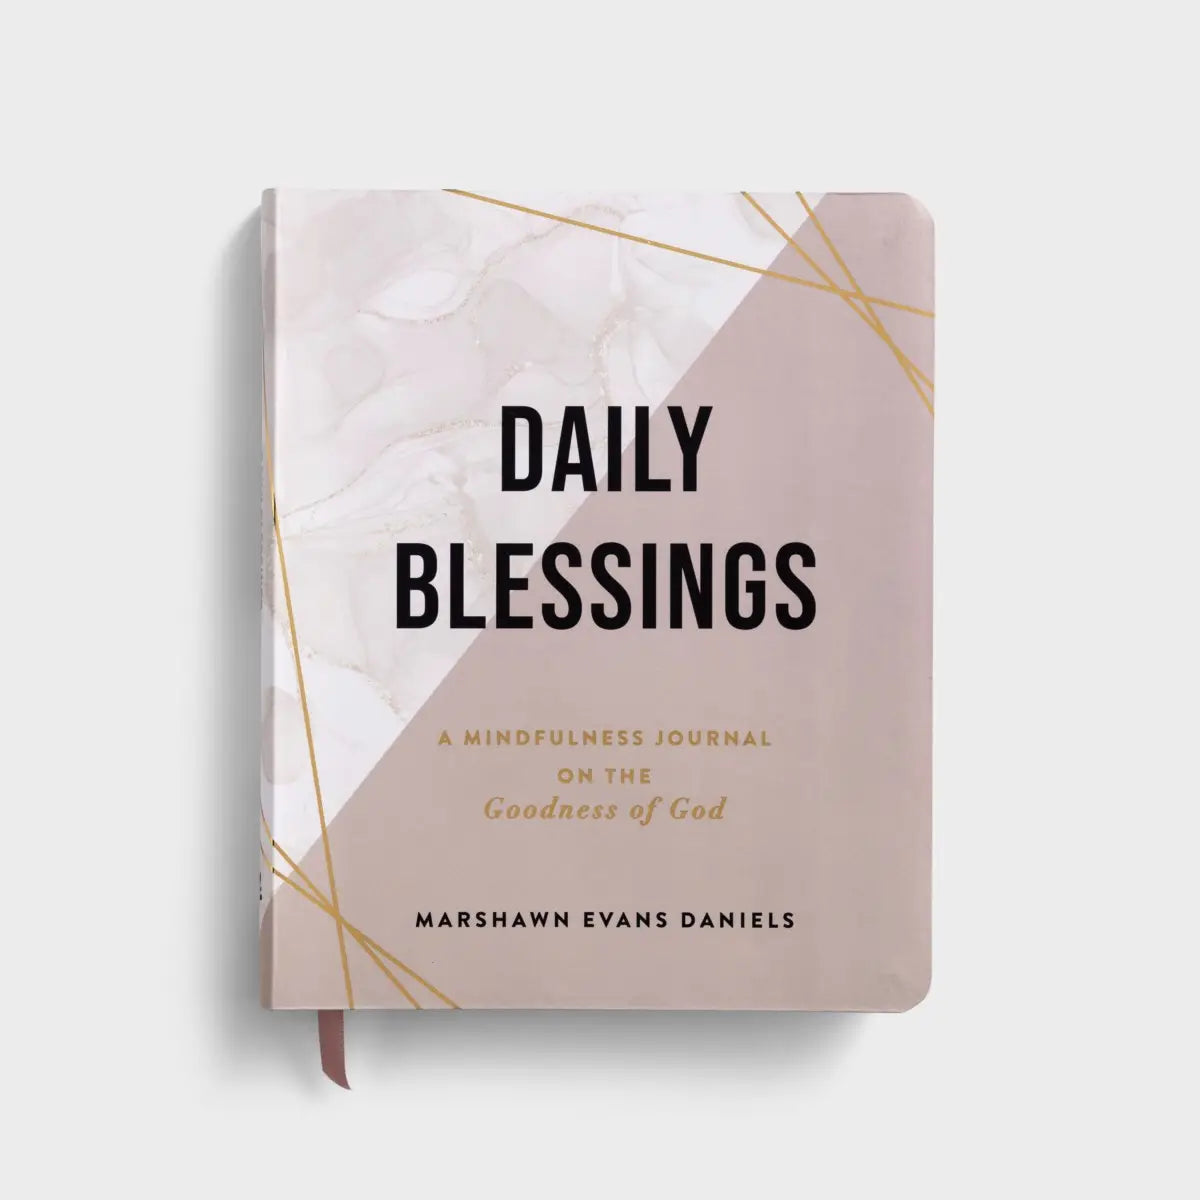 Daily Blessings: Mindfulness Journal-Marshawn Evans Daniels